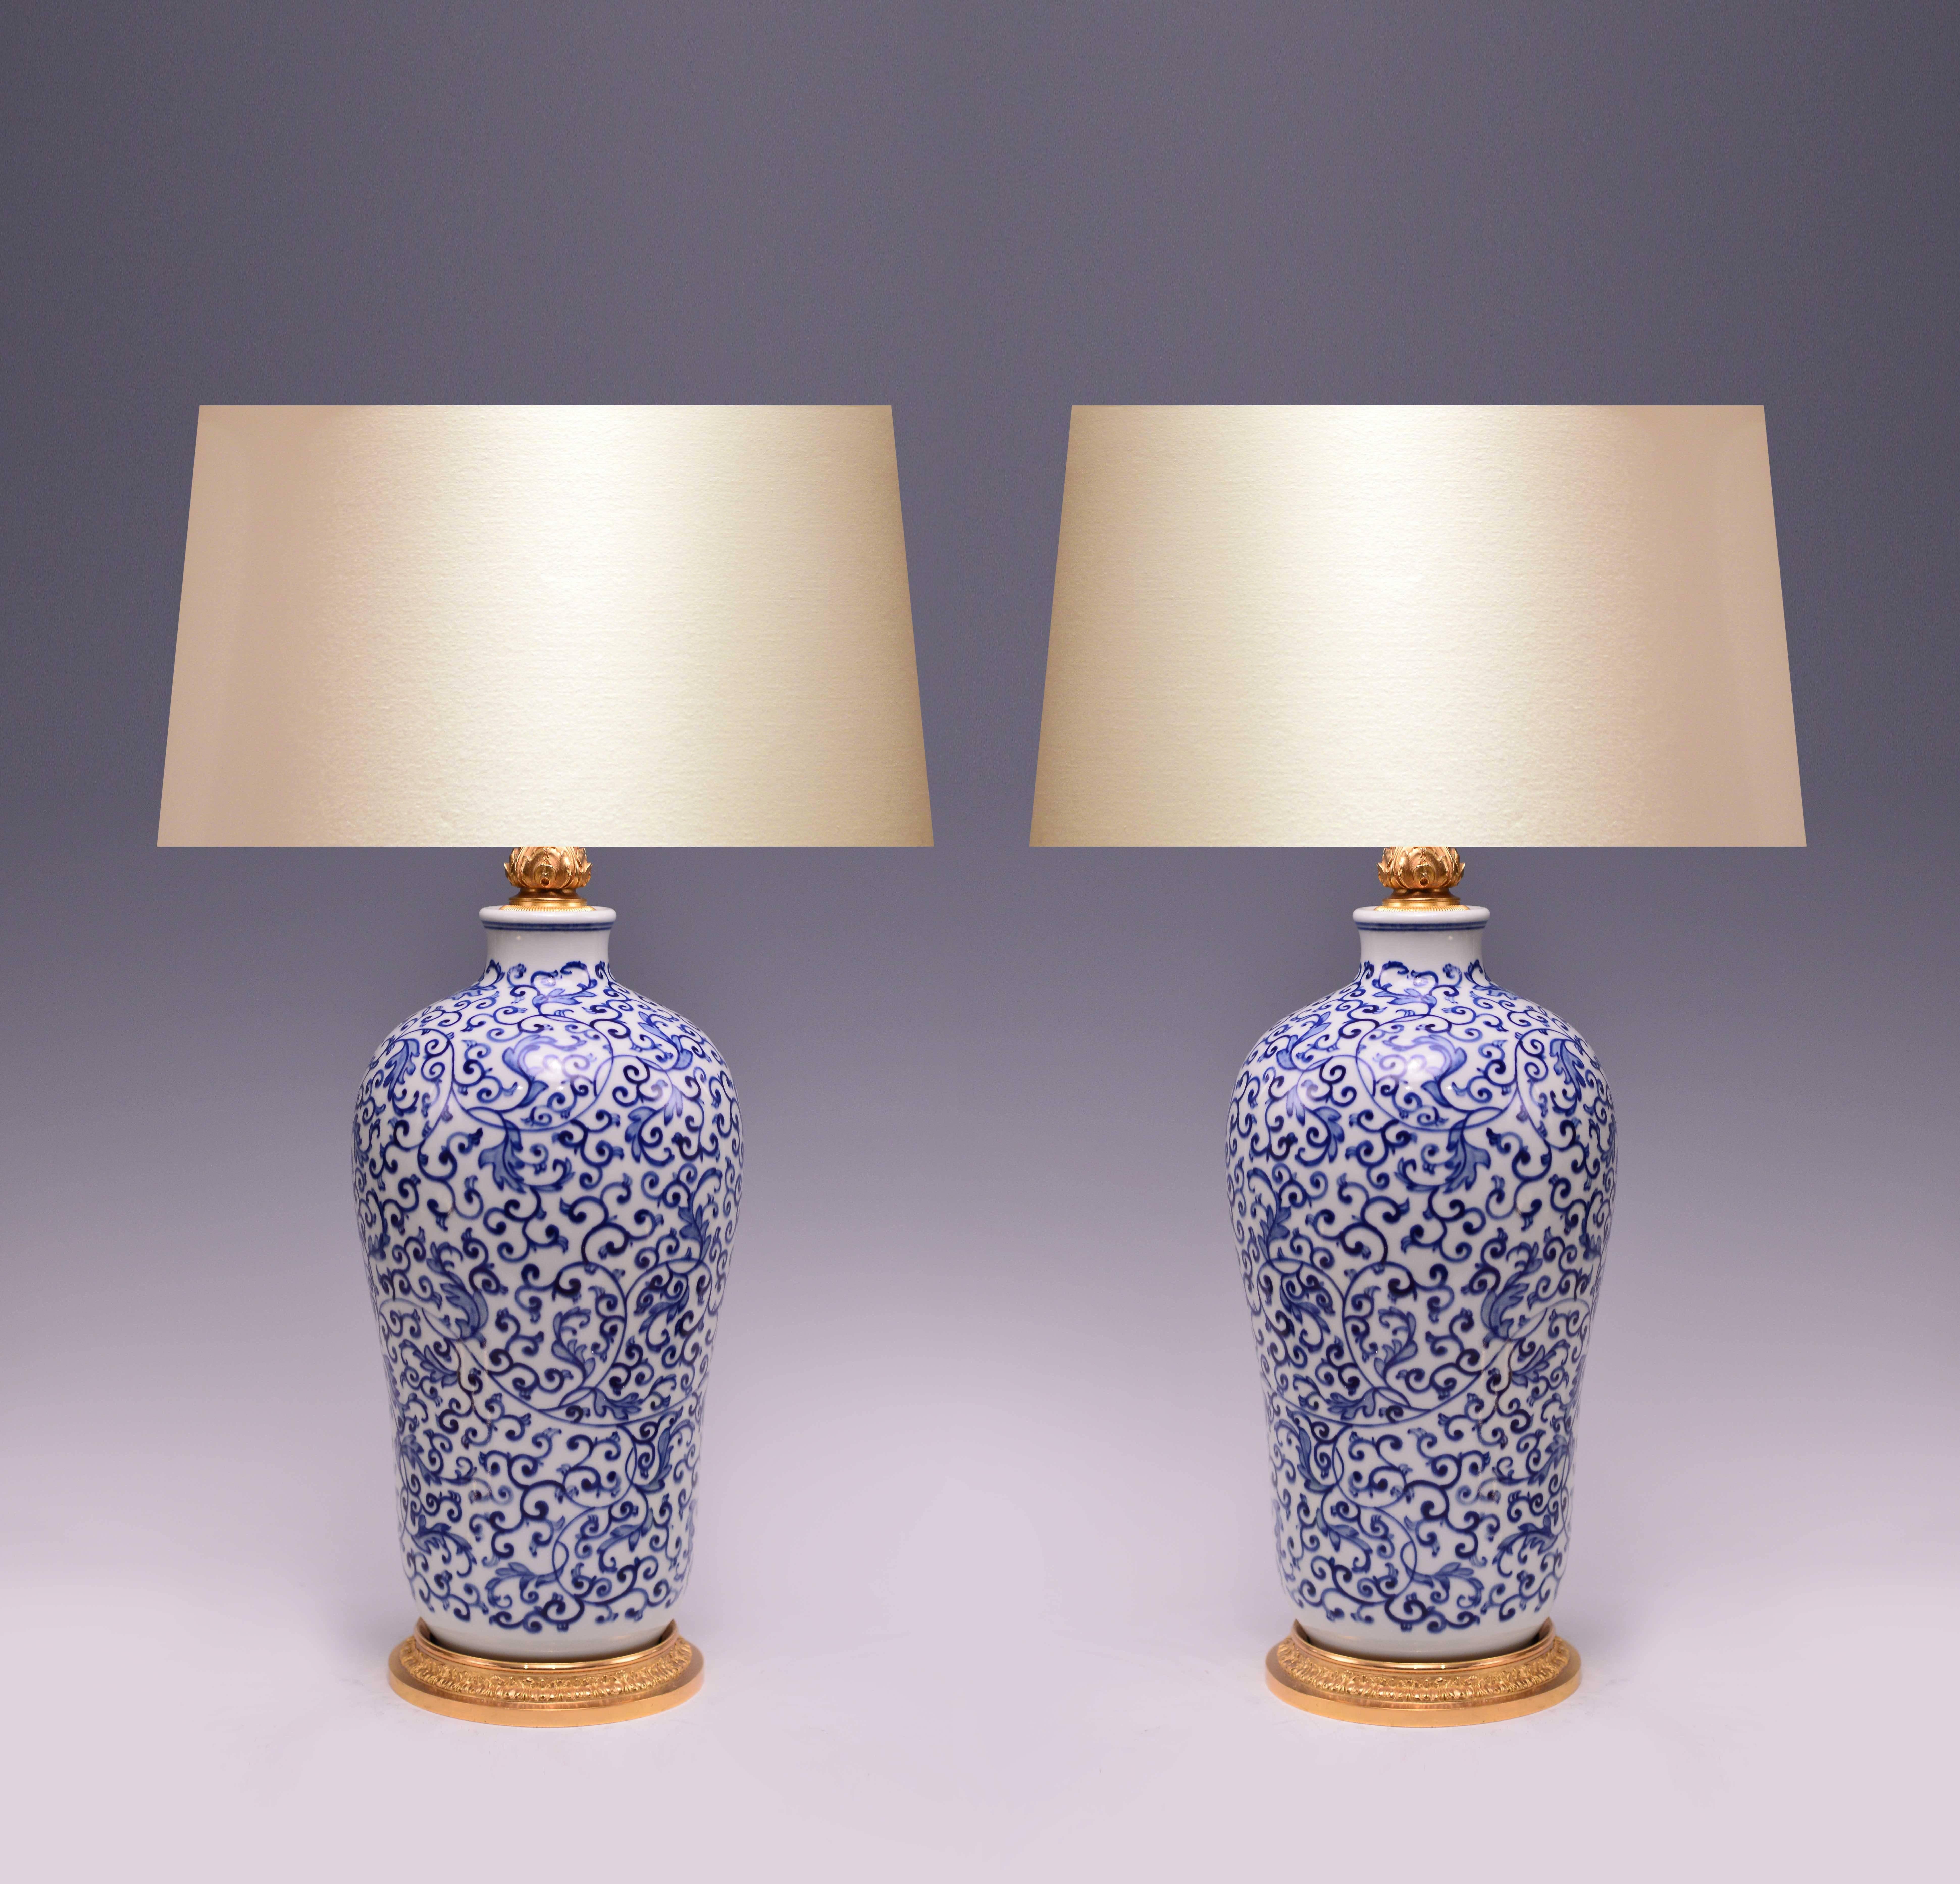 Pair of finely painted blue and white porcelain lamps with floral scroll decoration, gilt brass bases.
Measures: To the porcelain 16.5 inch H.
(Lampshade not included).